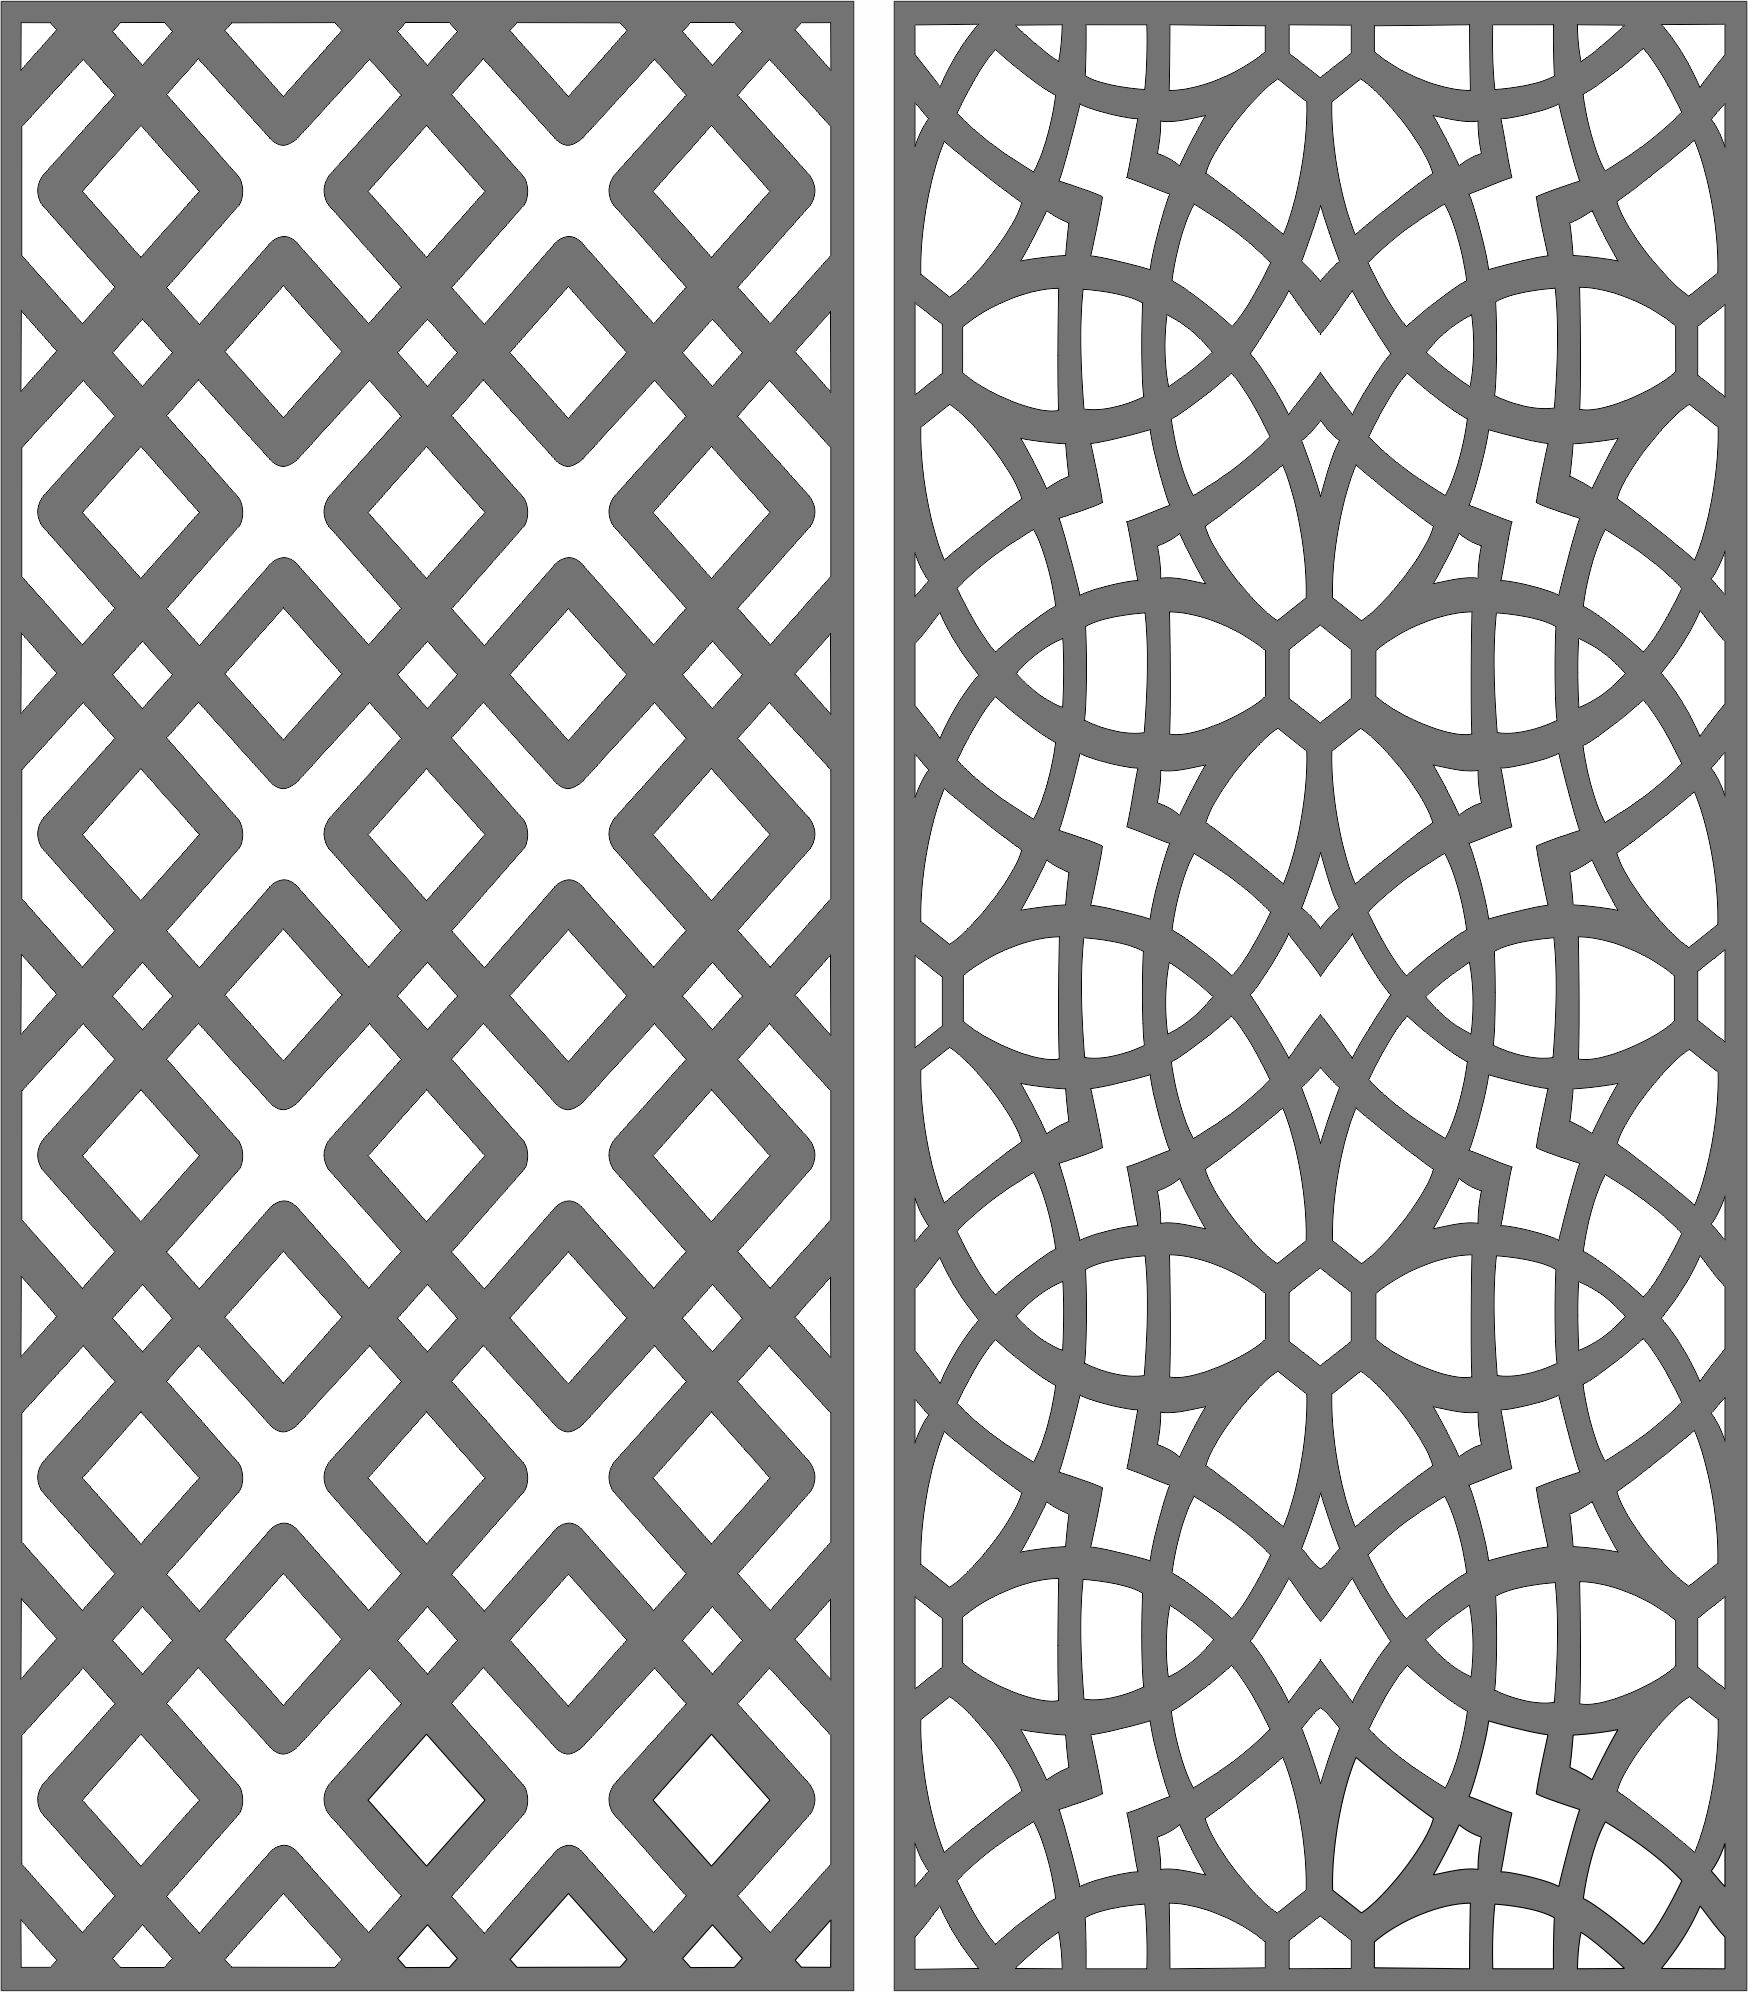 Privacy Partition Indoor Panel Decorative Room Divider Seamless Pattern For Laser Cutting Free DXF File